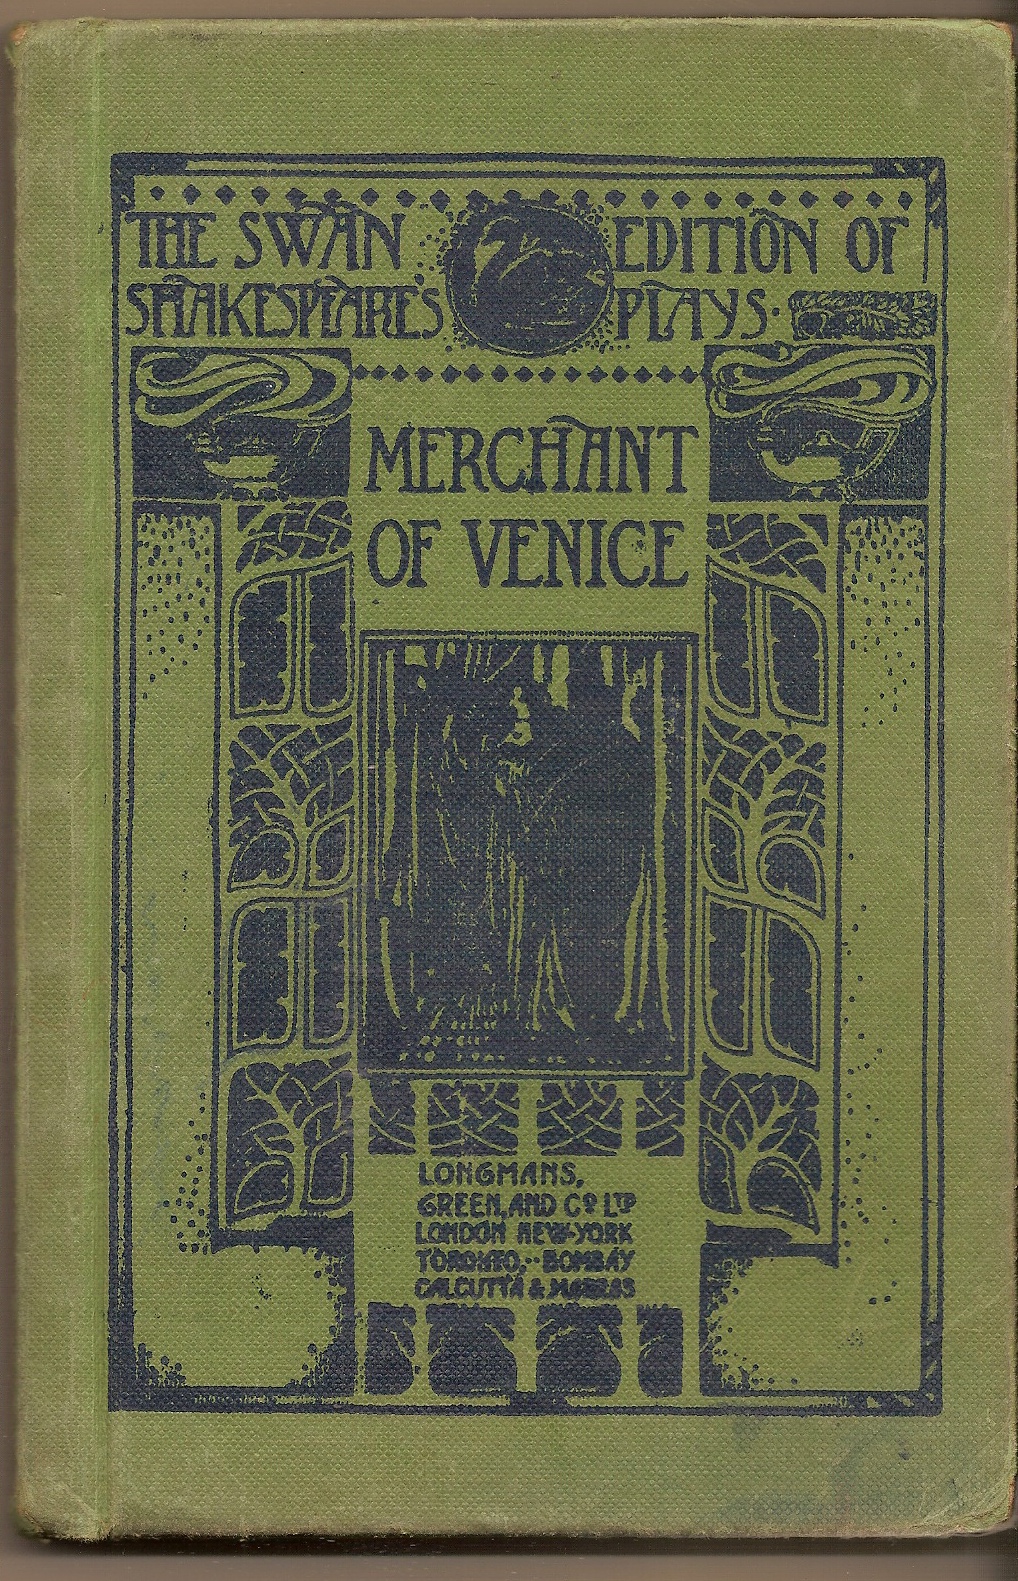 SHAKESPEARE, WILLIAM; BIDGOOD, JOHN (NOTES); COWPERTHWAITE, W. A. (CHARACTER SKETCHES) - Merchant of Venice , the Canadian Edition of Swan Shakespeare